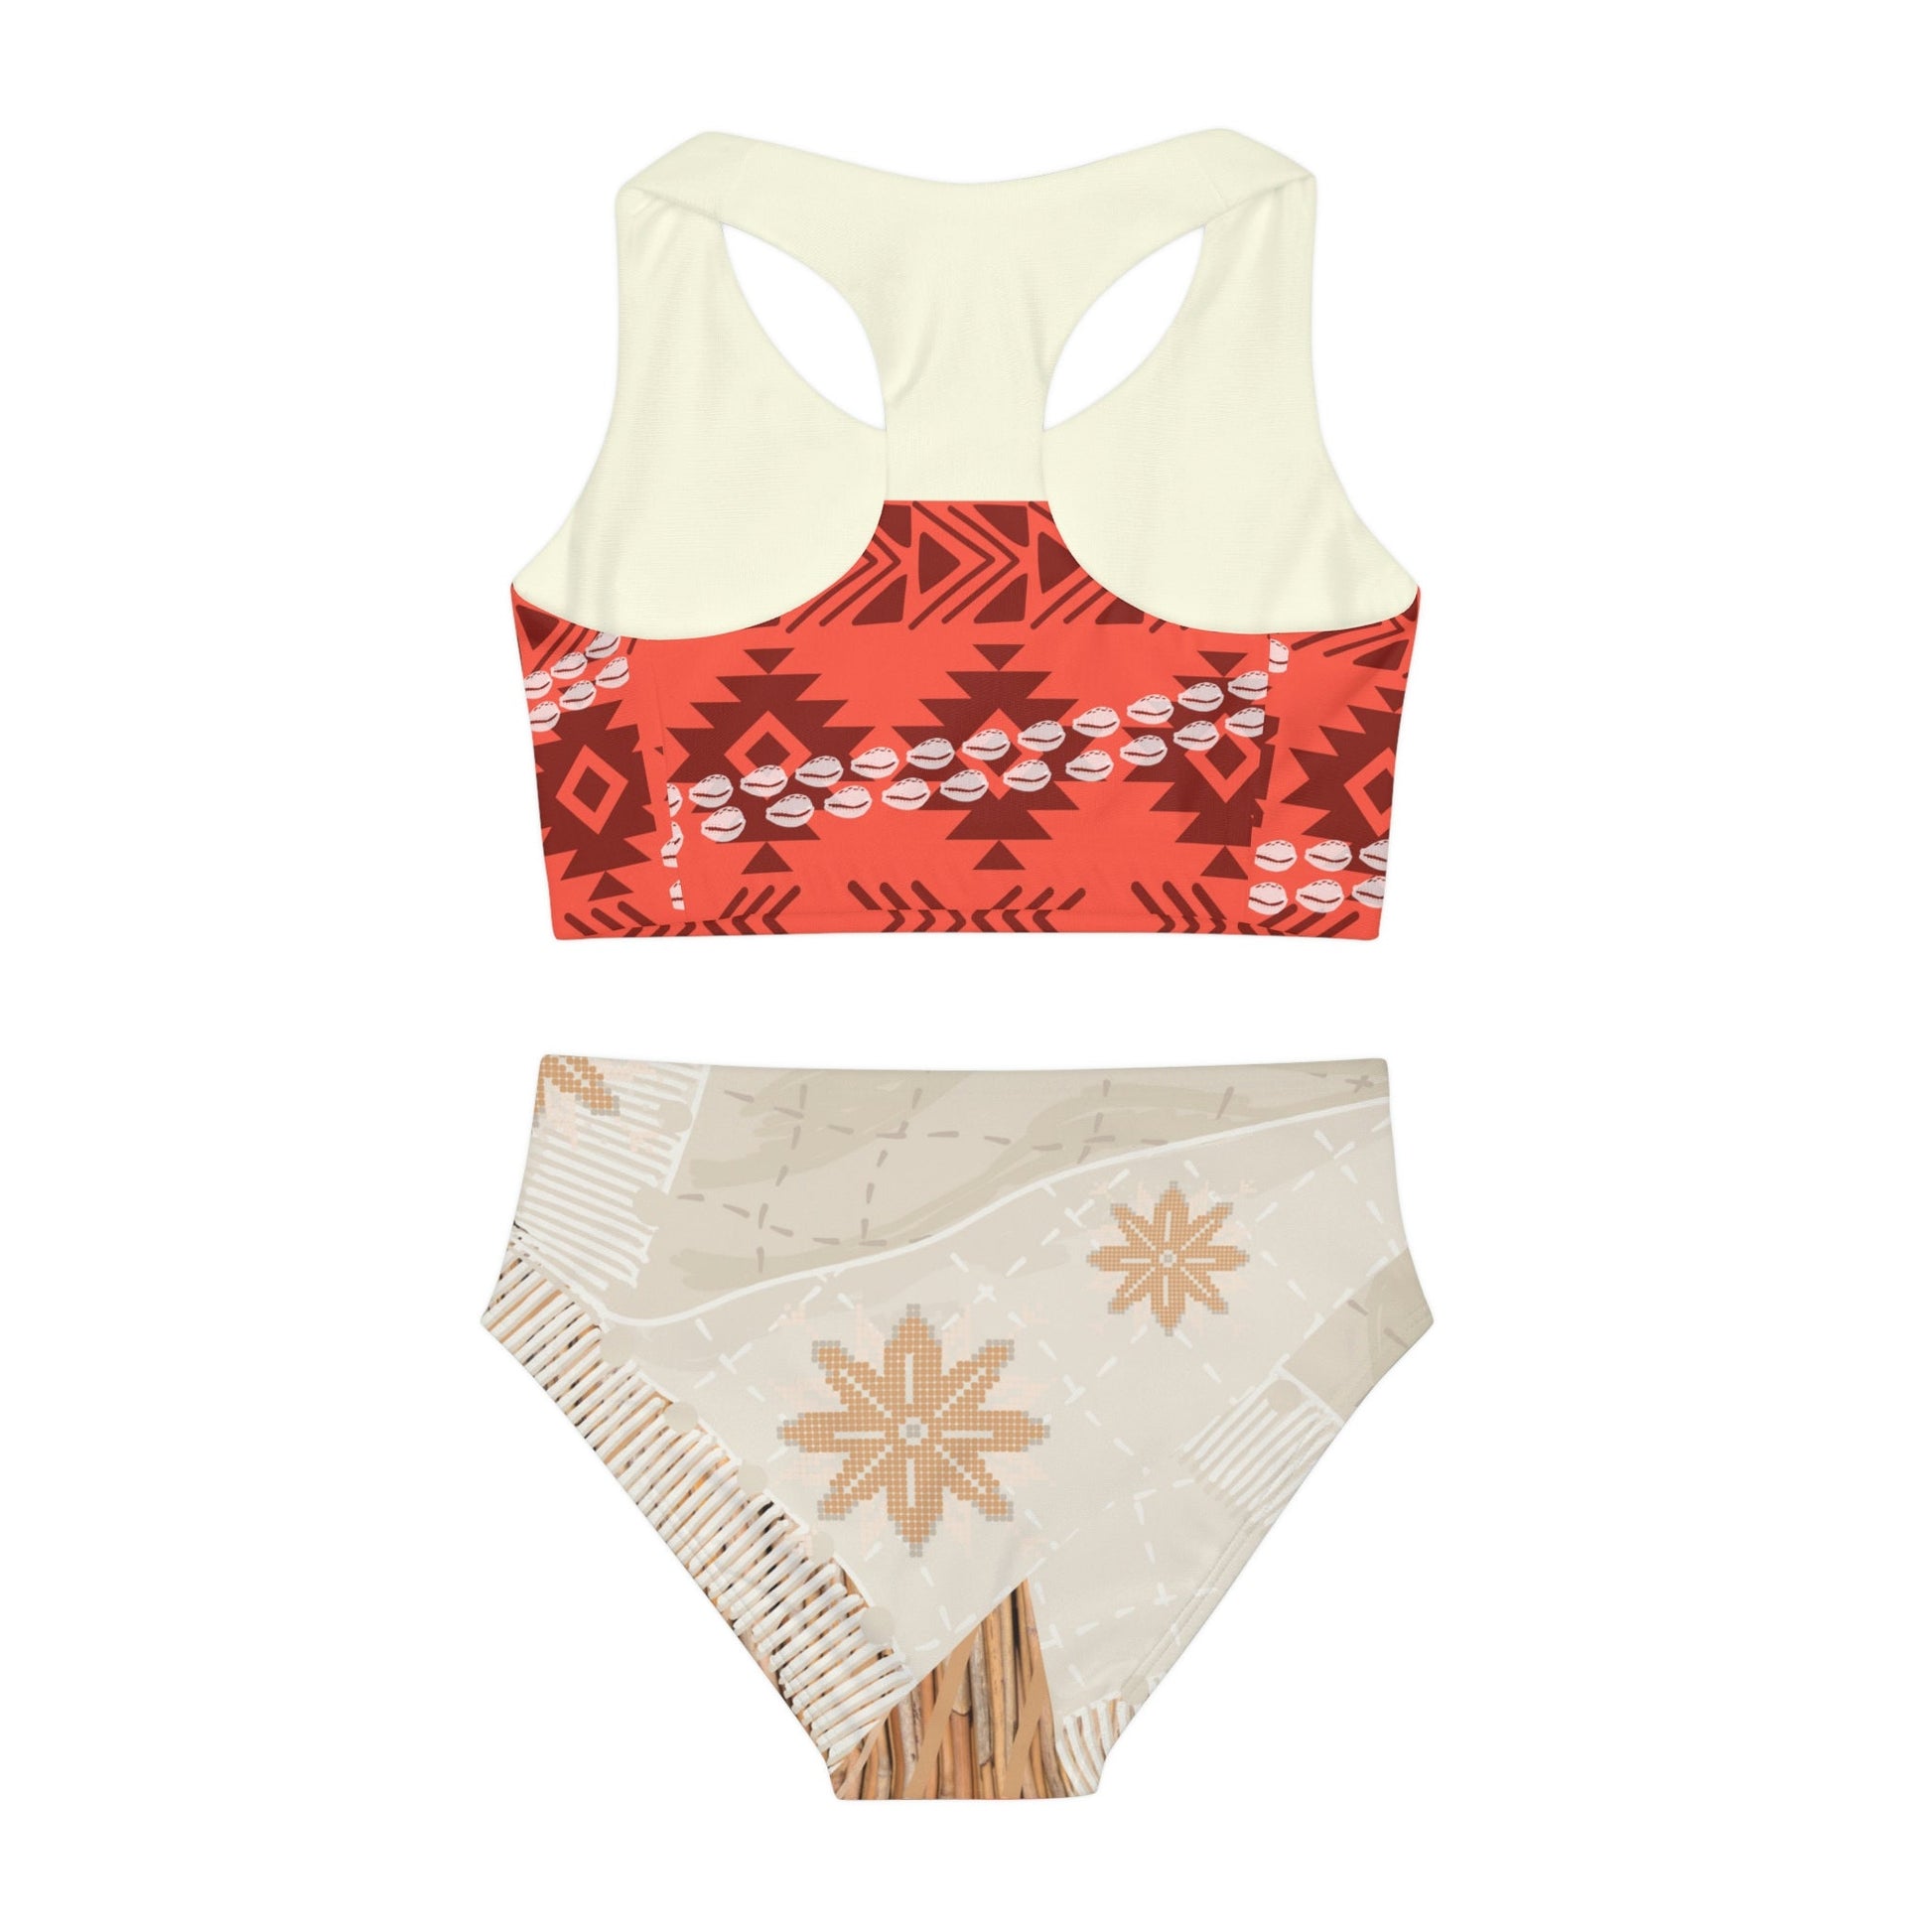 Polynesian Princess Girls Two Piece Swimsuit All Over PrintAOPAOP Clothing#tag4##tag5##tag6#